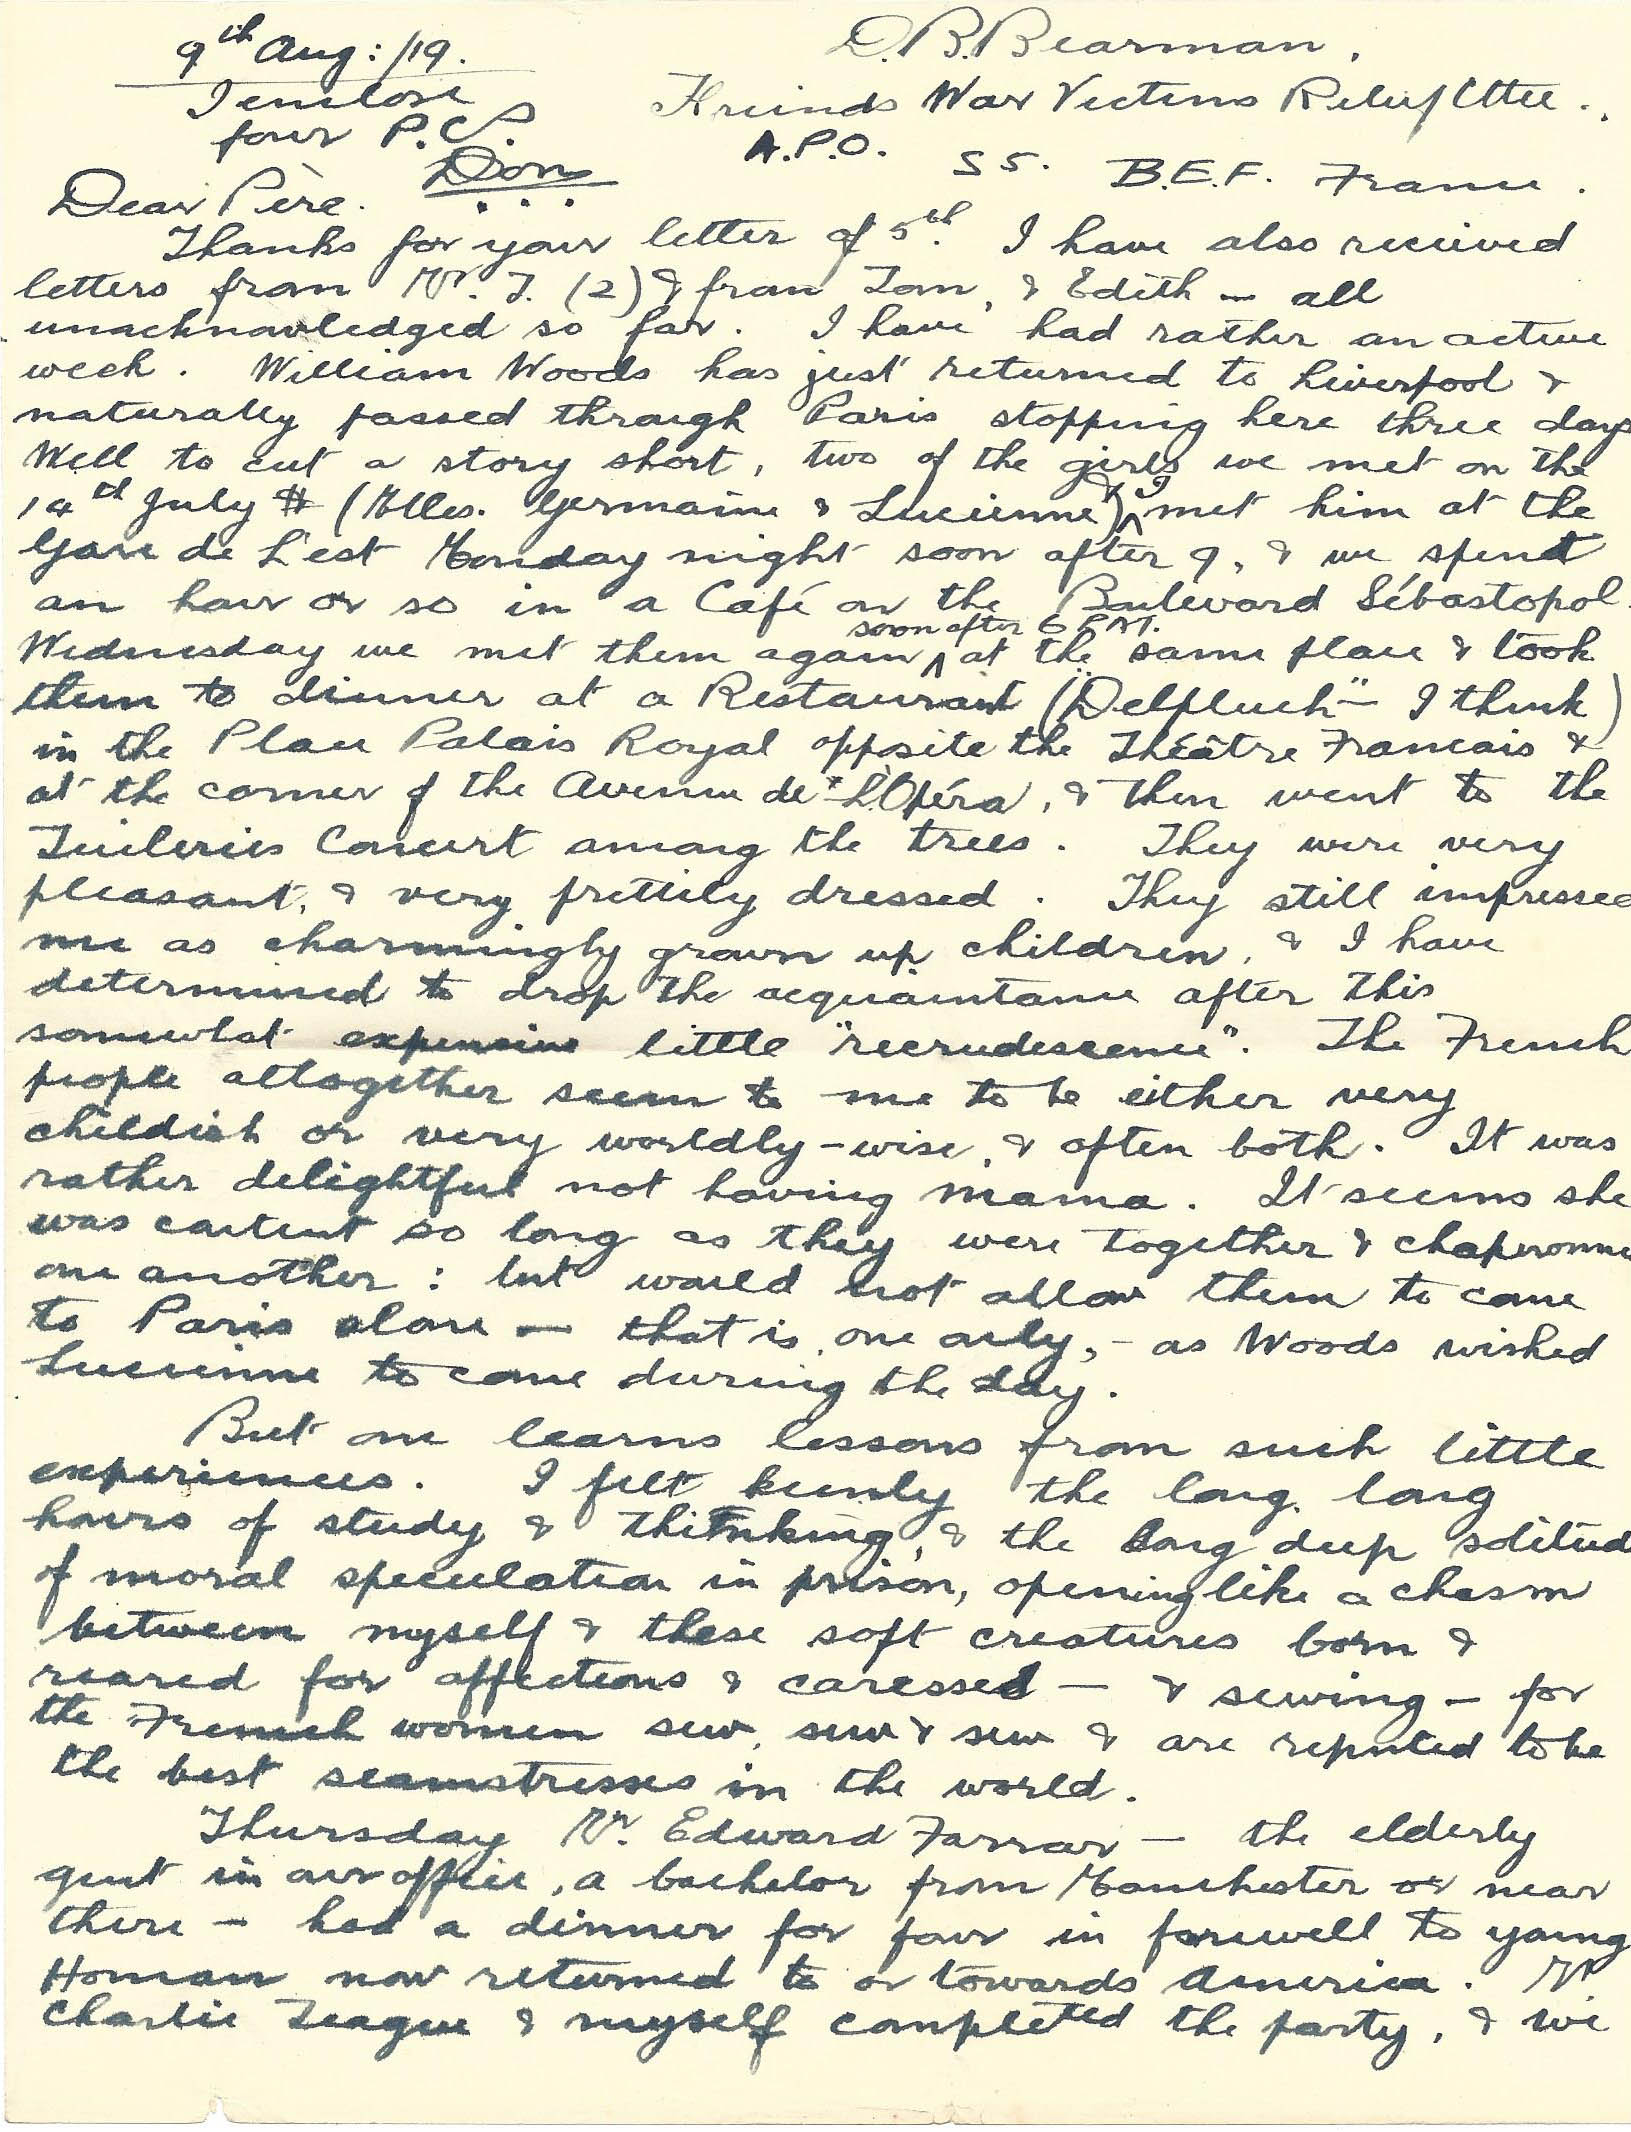 1919-08-09 p1 Donald Bearman letter to his father